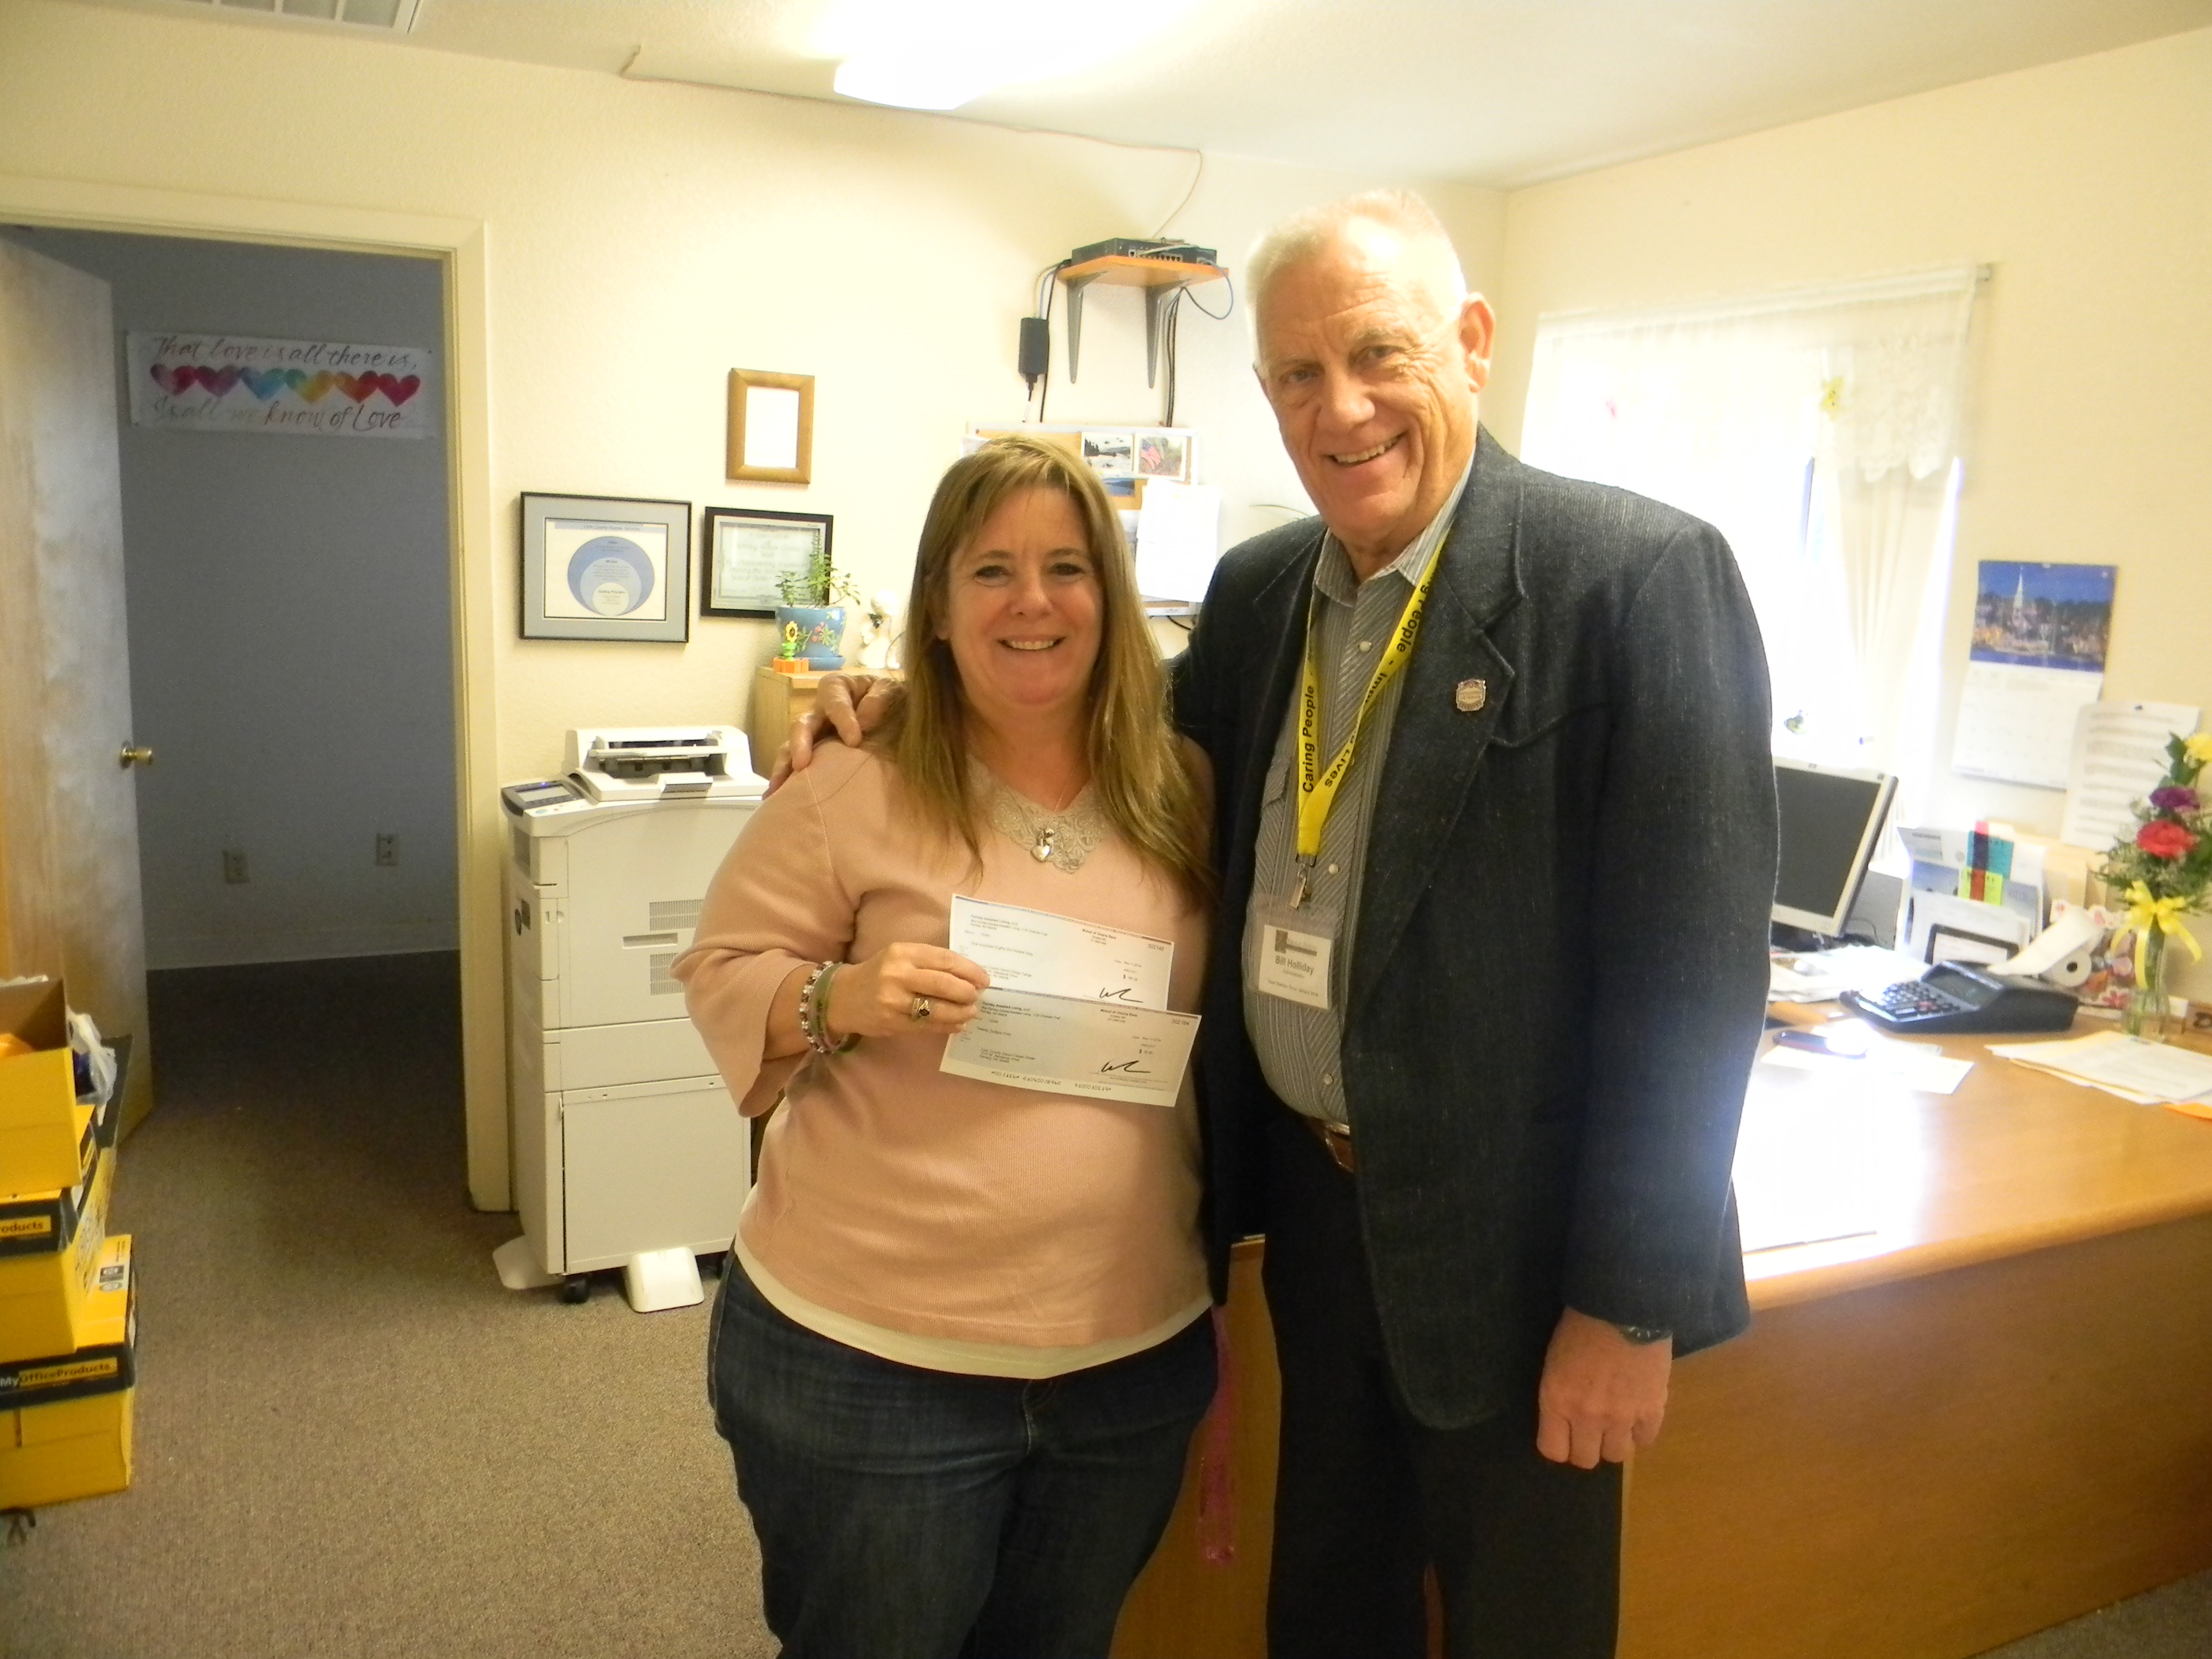 Bill presenting a check to the Senior Center in the amount of $206.00.